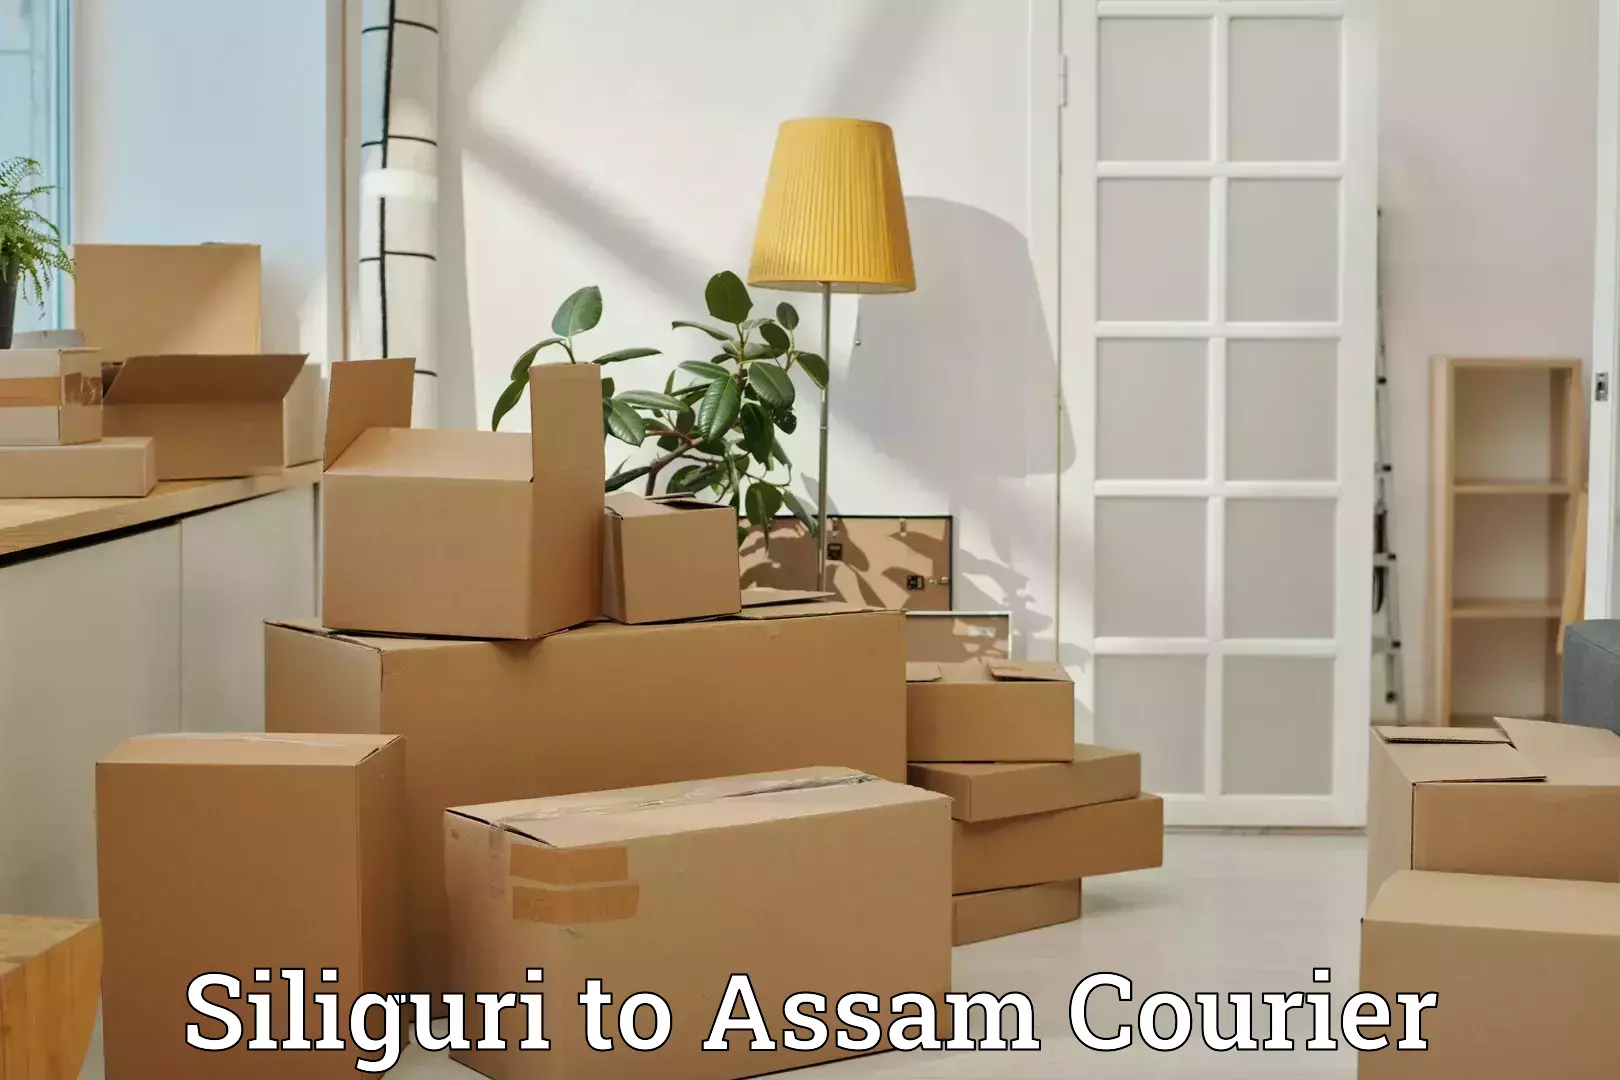 Luggage delivery network Siliguri to Lala Assam